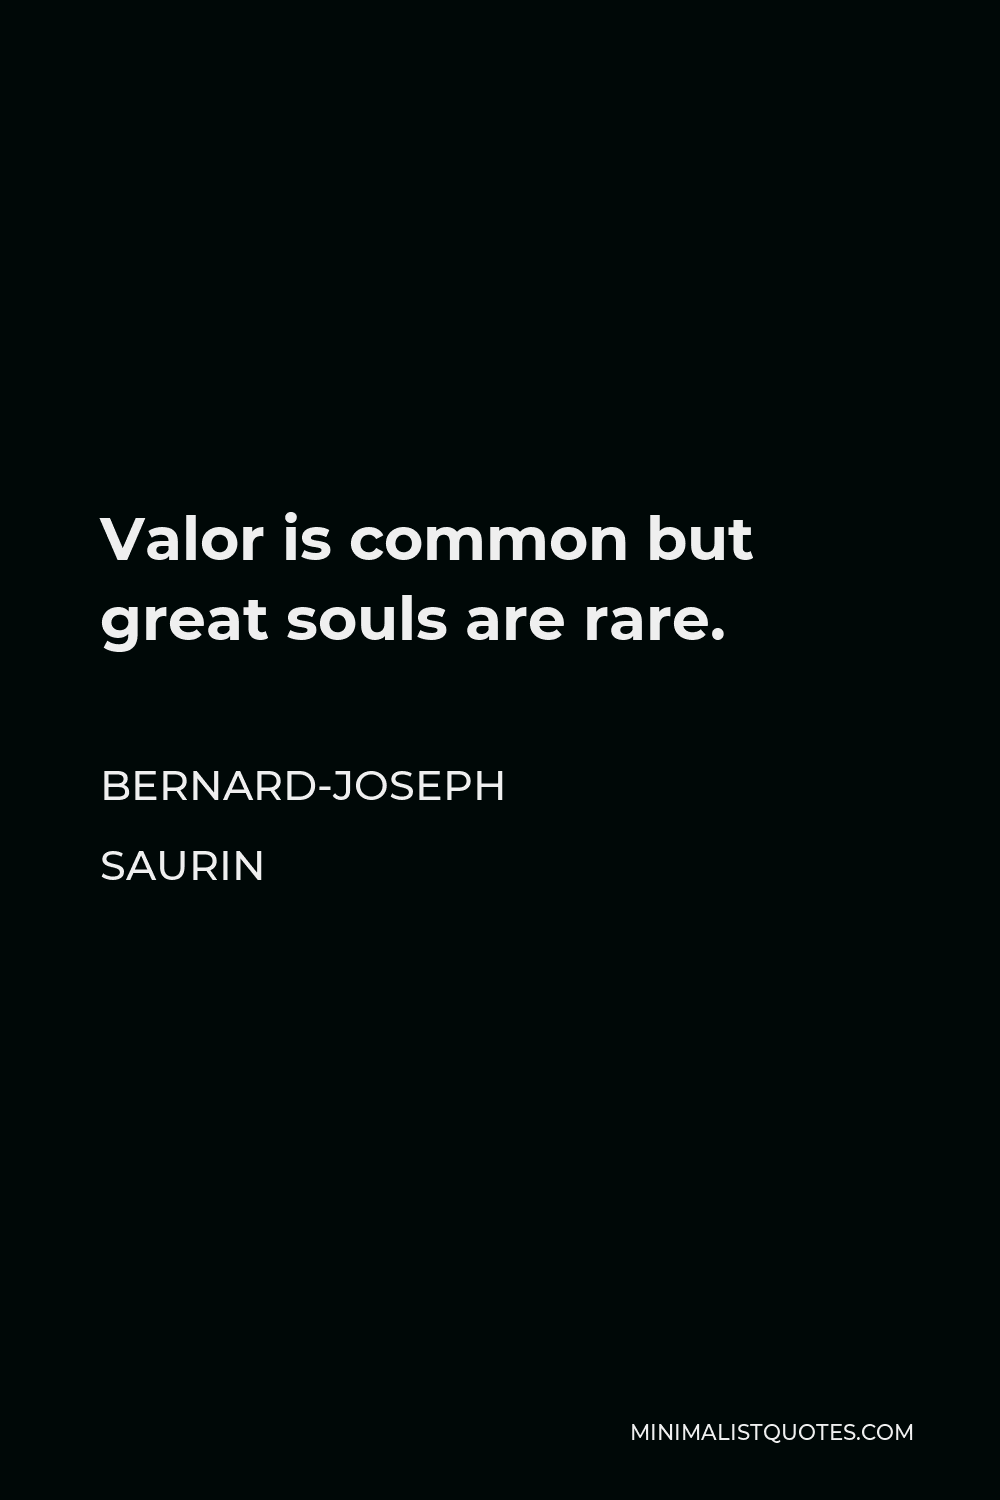 Bernard-Joseph Saurin Quote - Valor is common but great souls are rare.